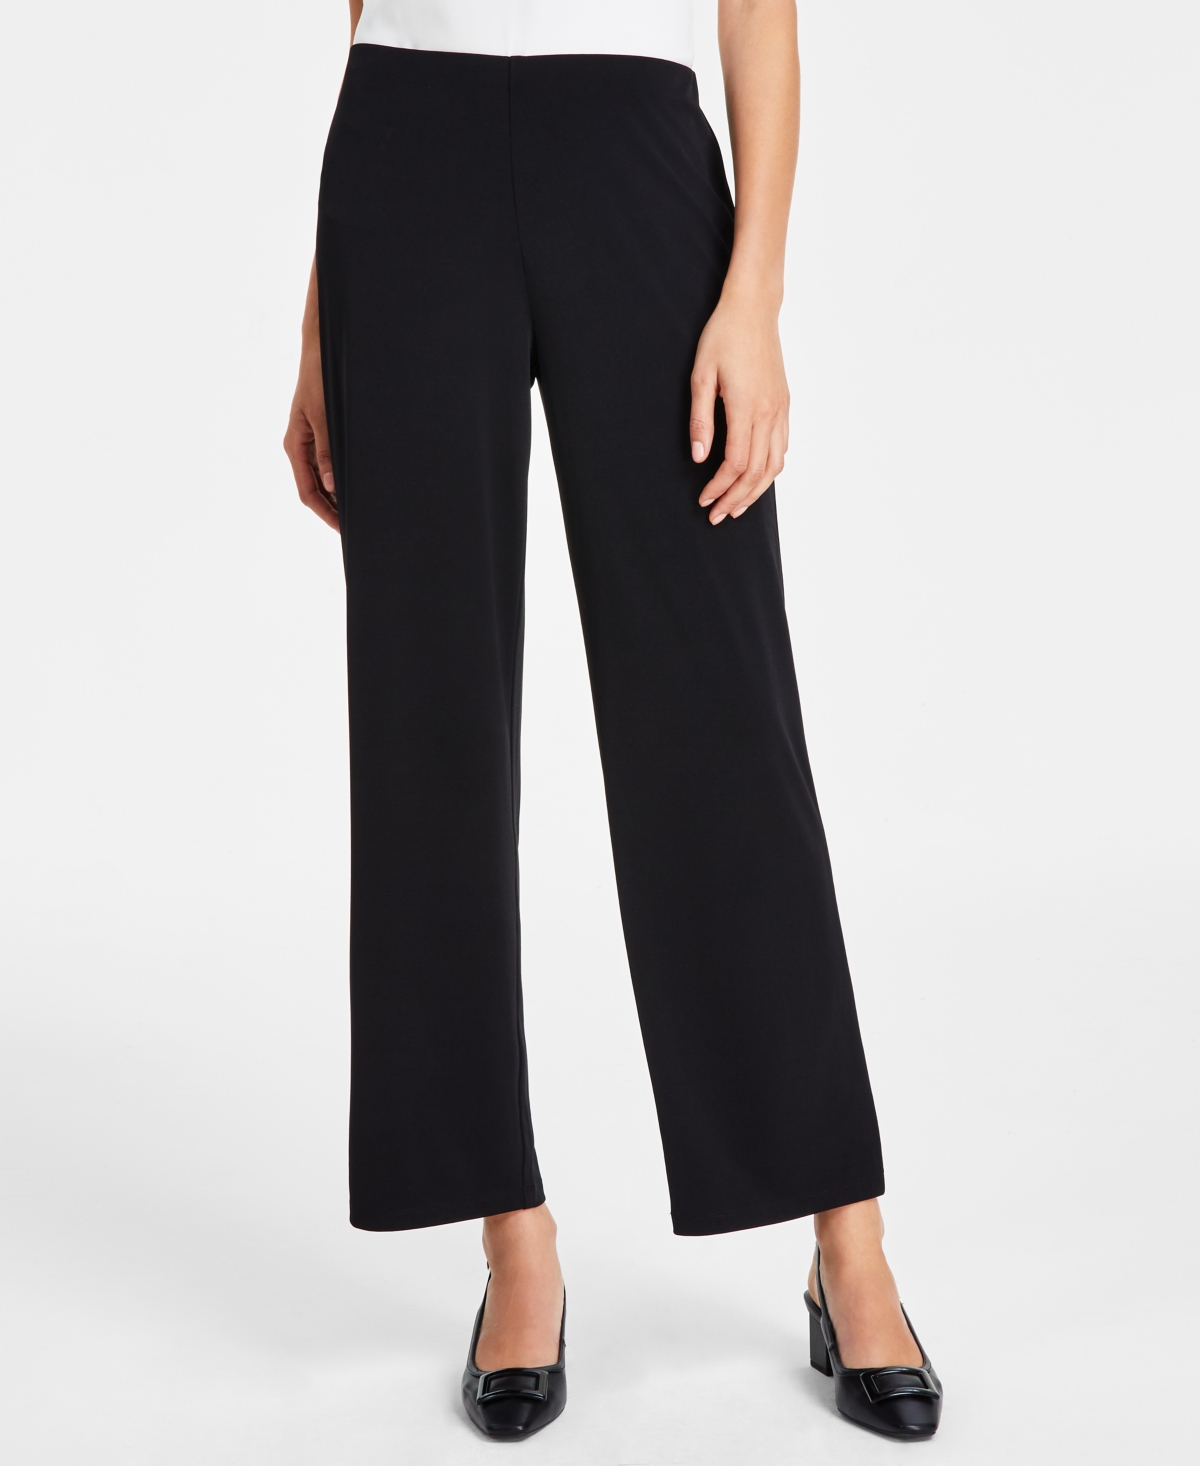 Jm Collection Women's Knit Wide-Leg Pull-On Pants, Regular & Short Lengths,  Created for Macy's - Intrepid Blue